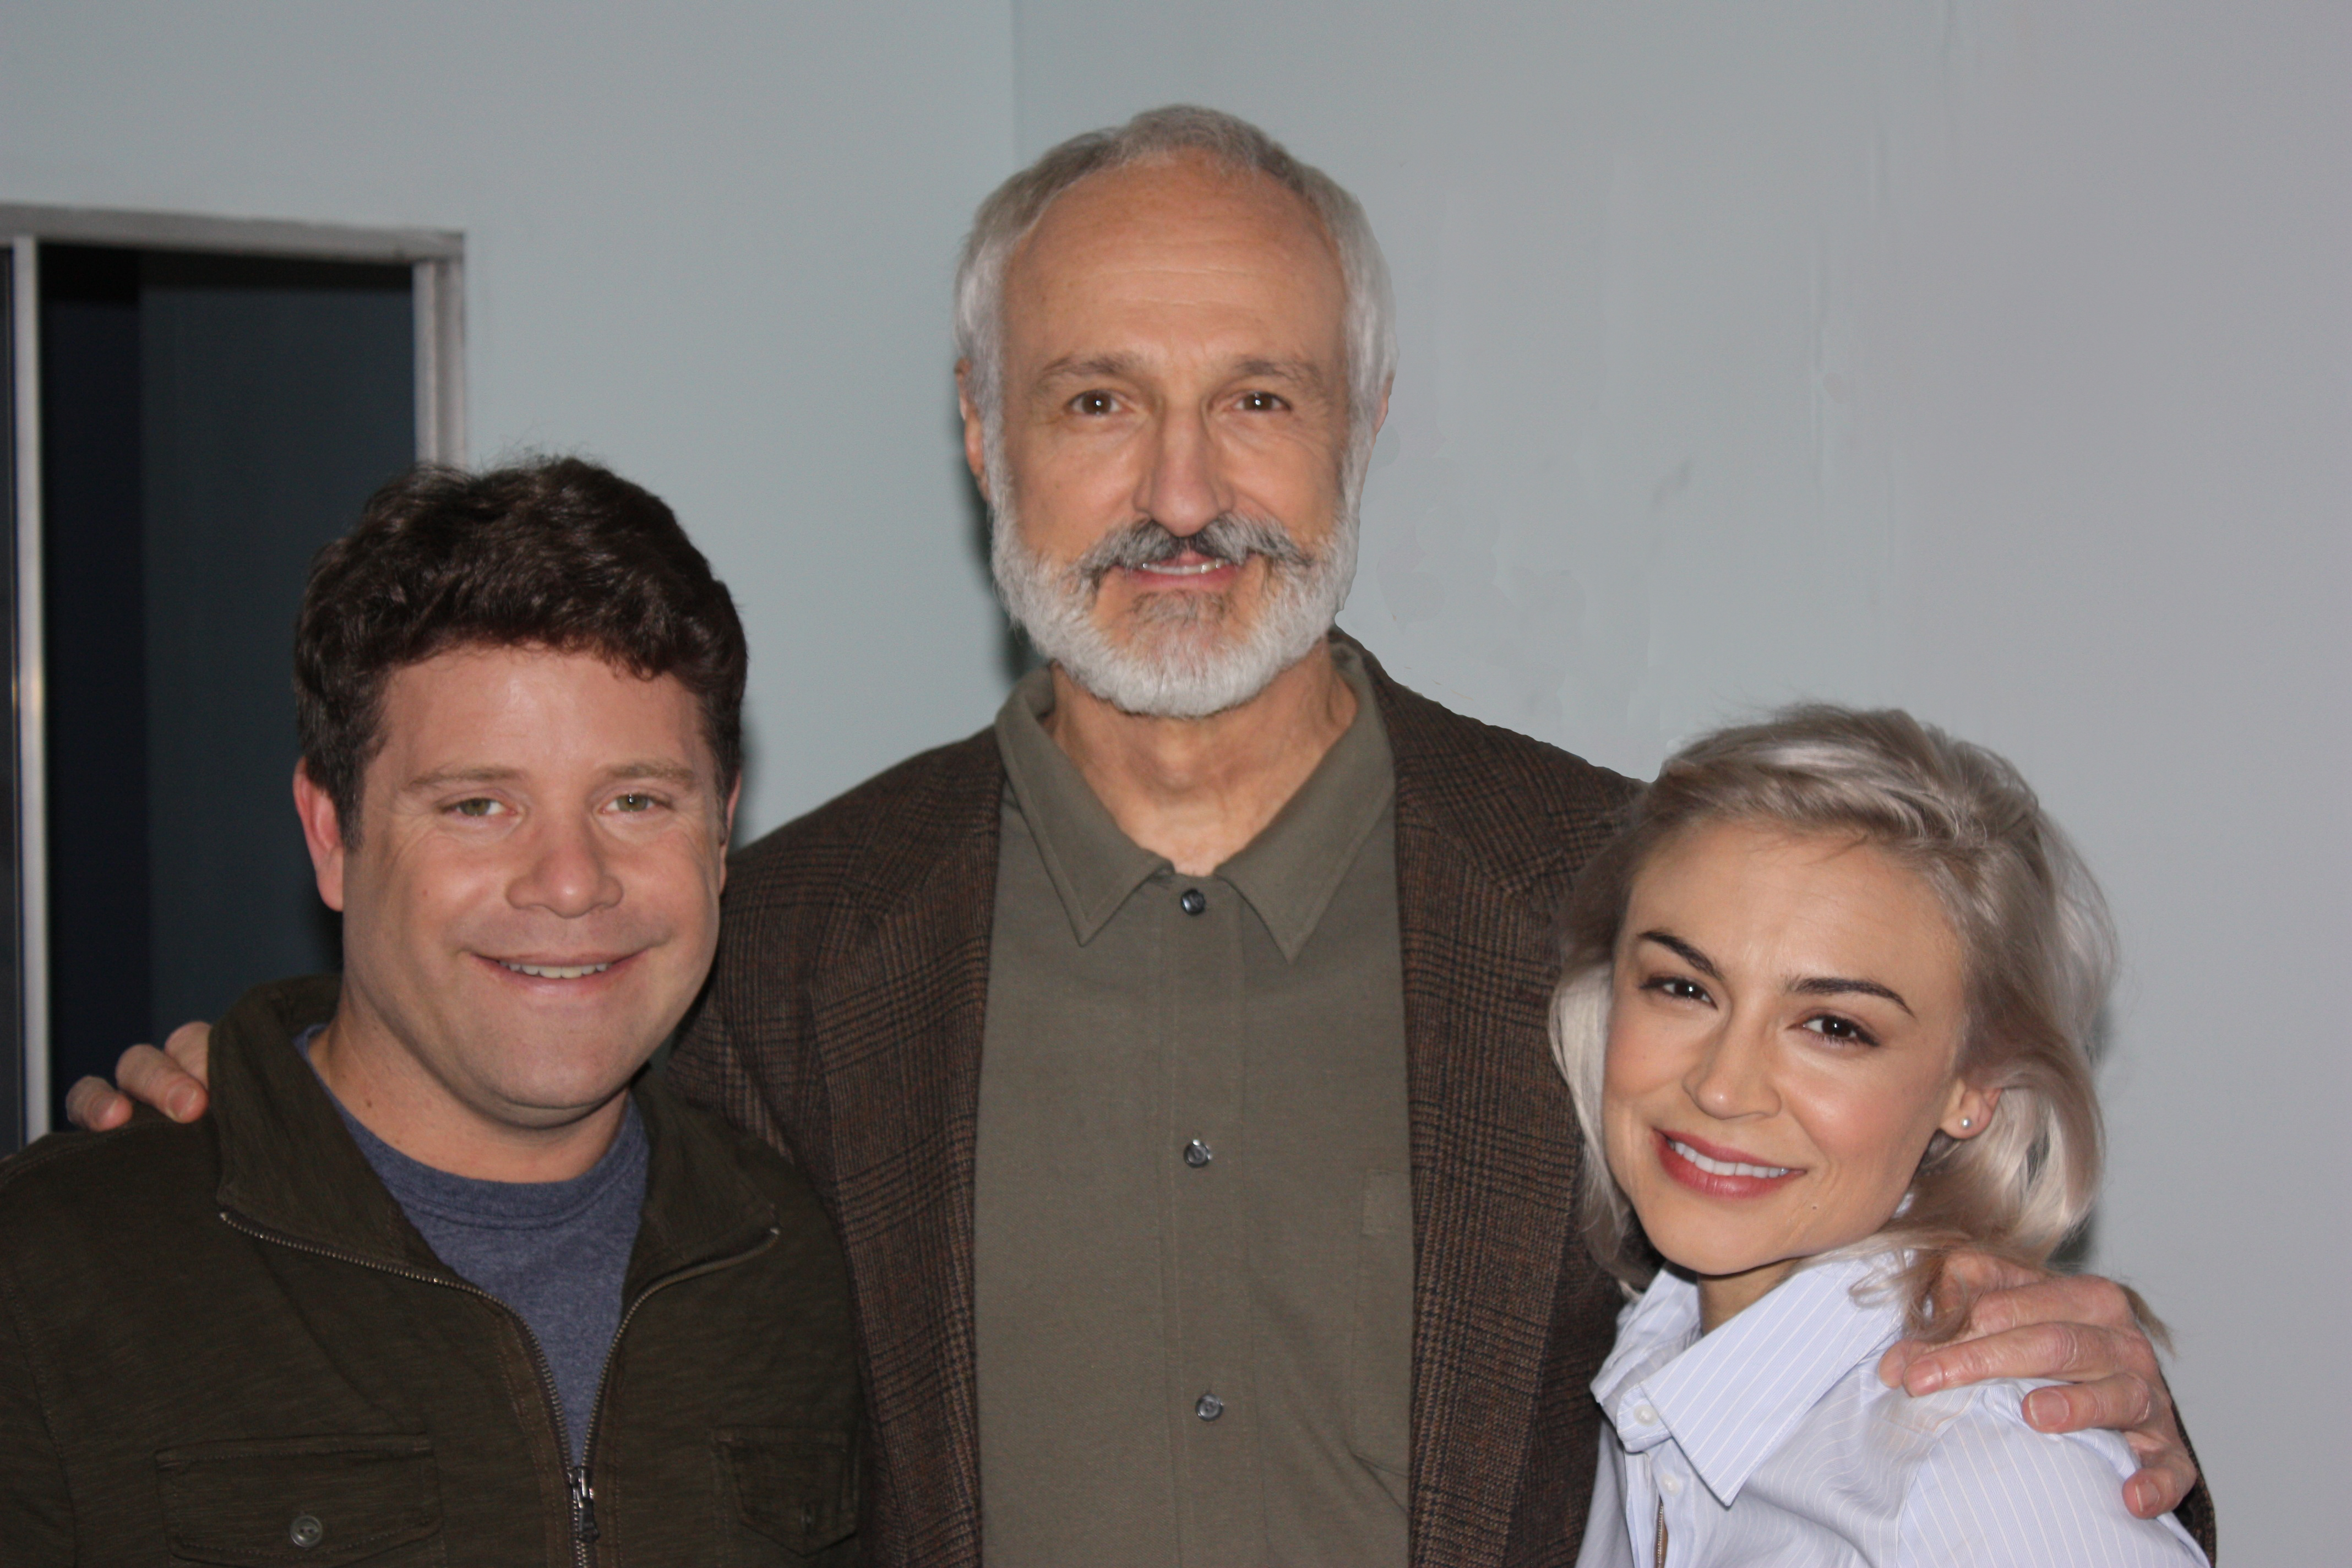 Actor Michael Gross with co-stars Sean Astin and Samaire Armstrong on the set of the 2012 film, 